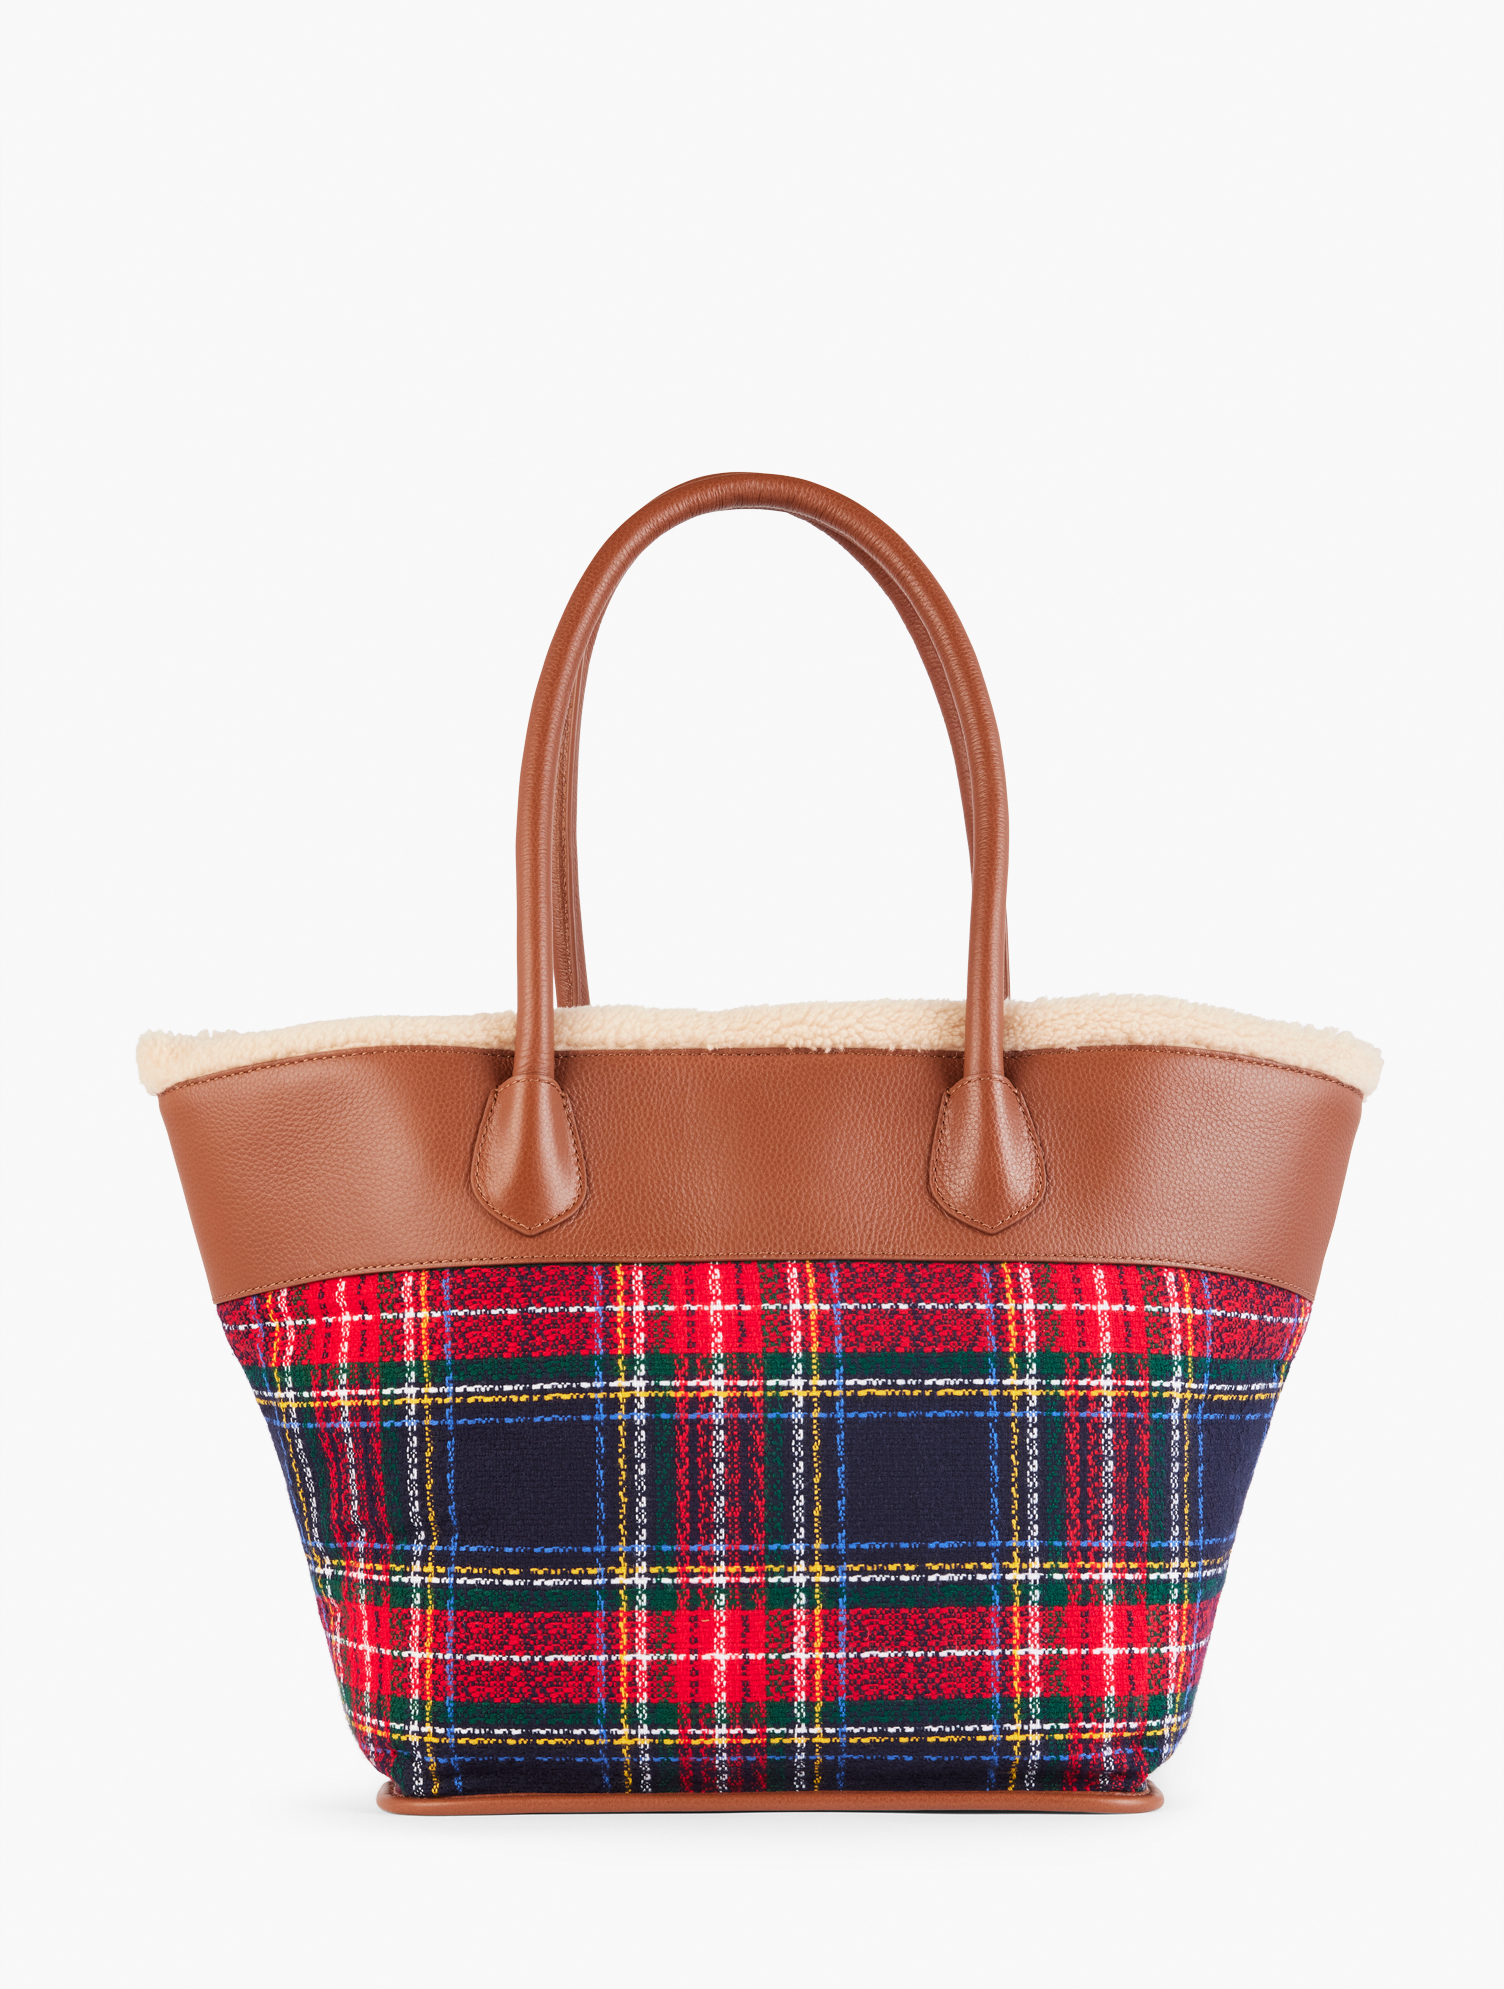 Talbots Glee Plaid Oversized Tote - Navy Blue/red - 001  In Navy Blue,red